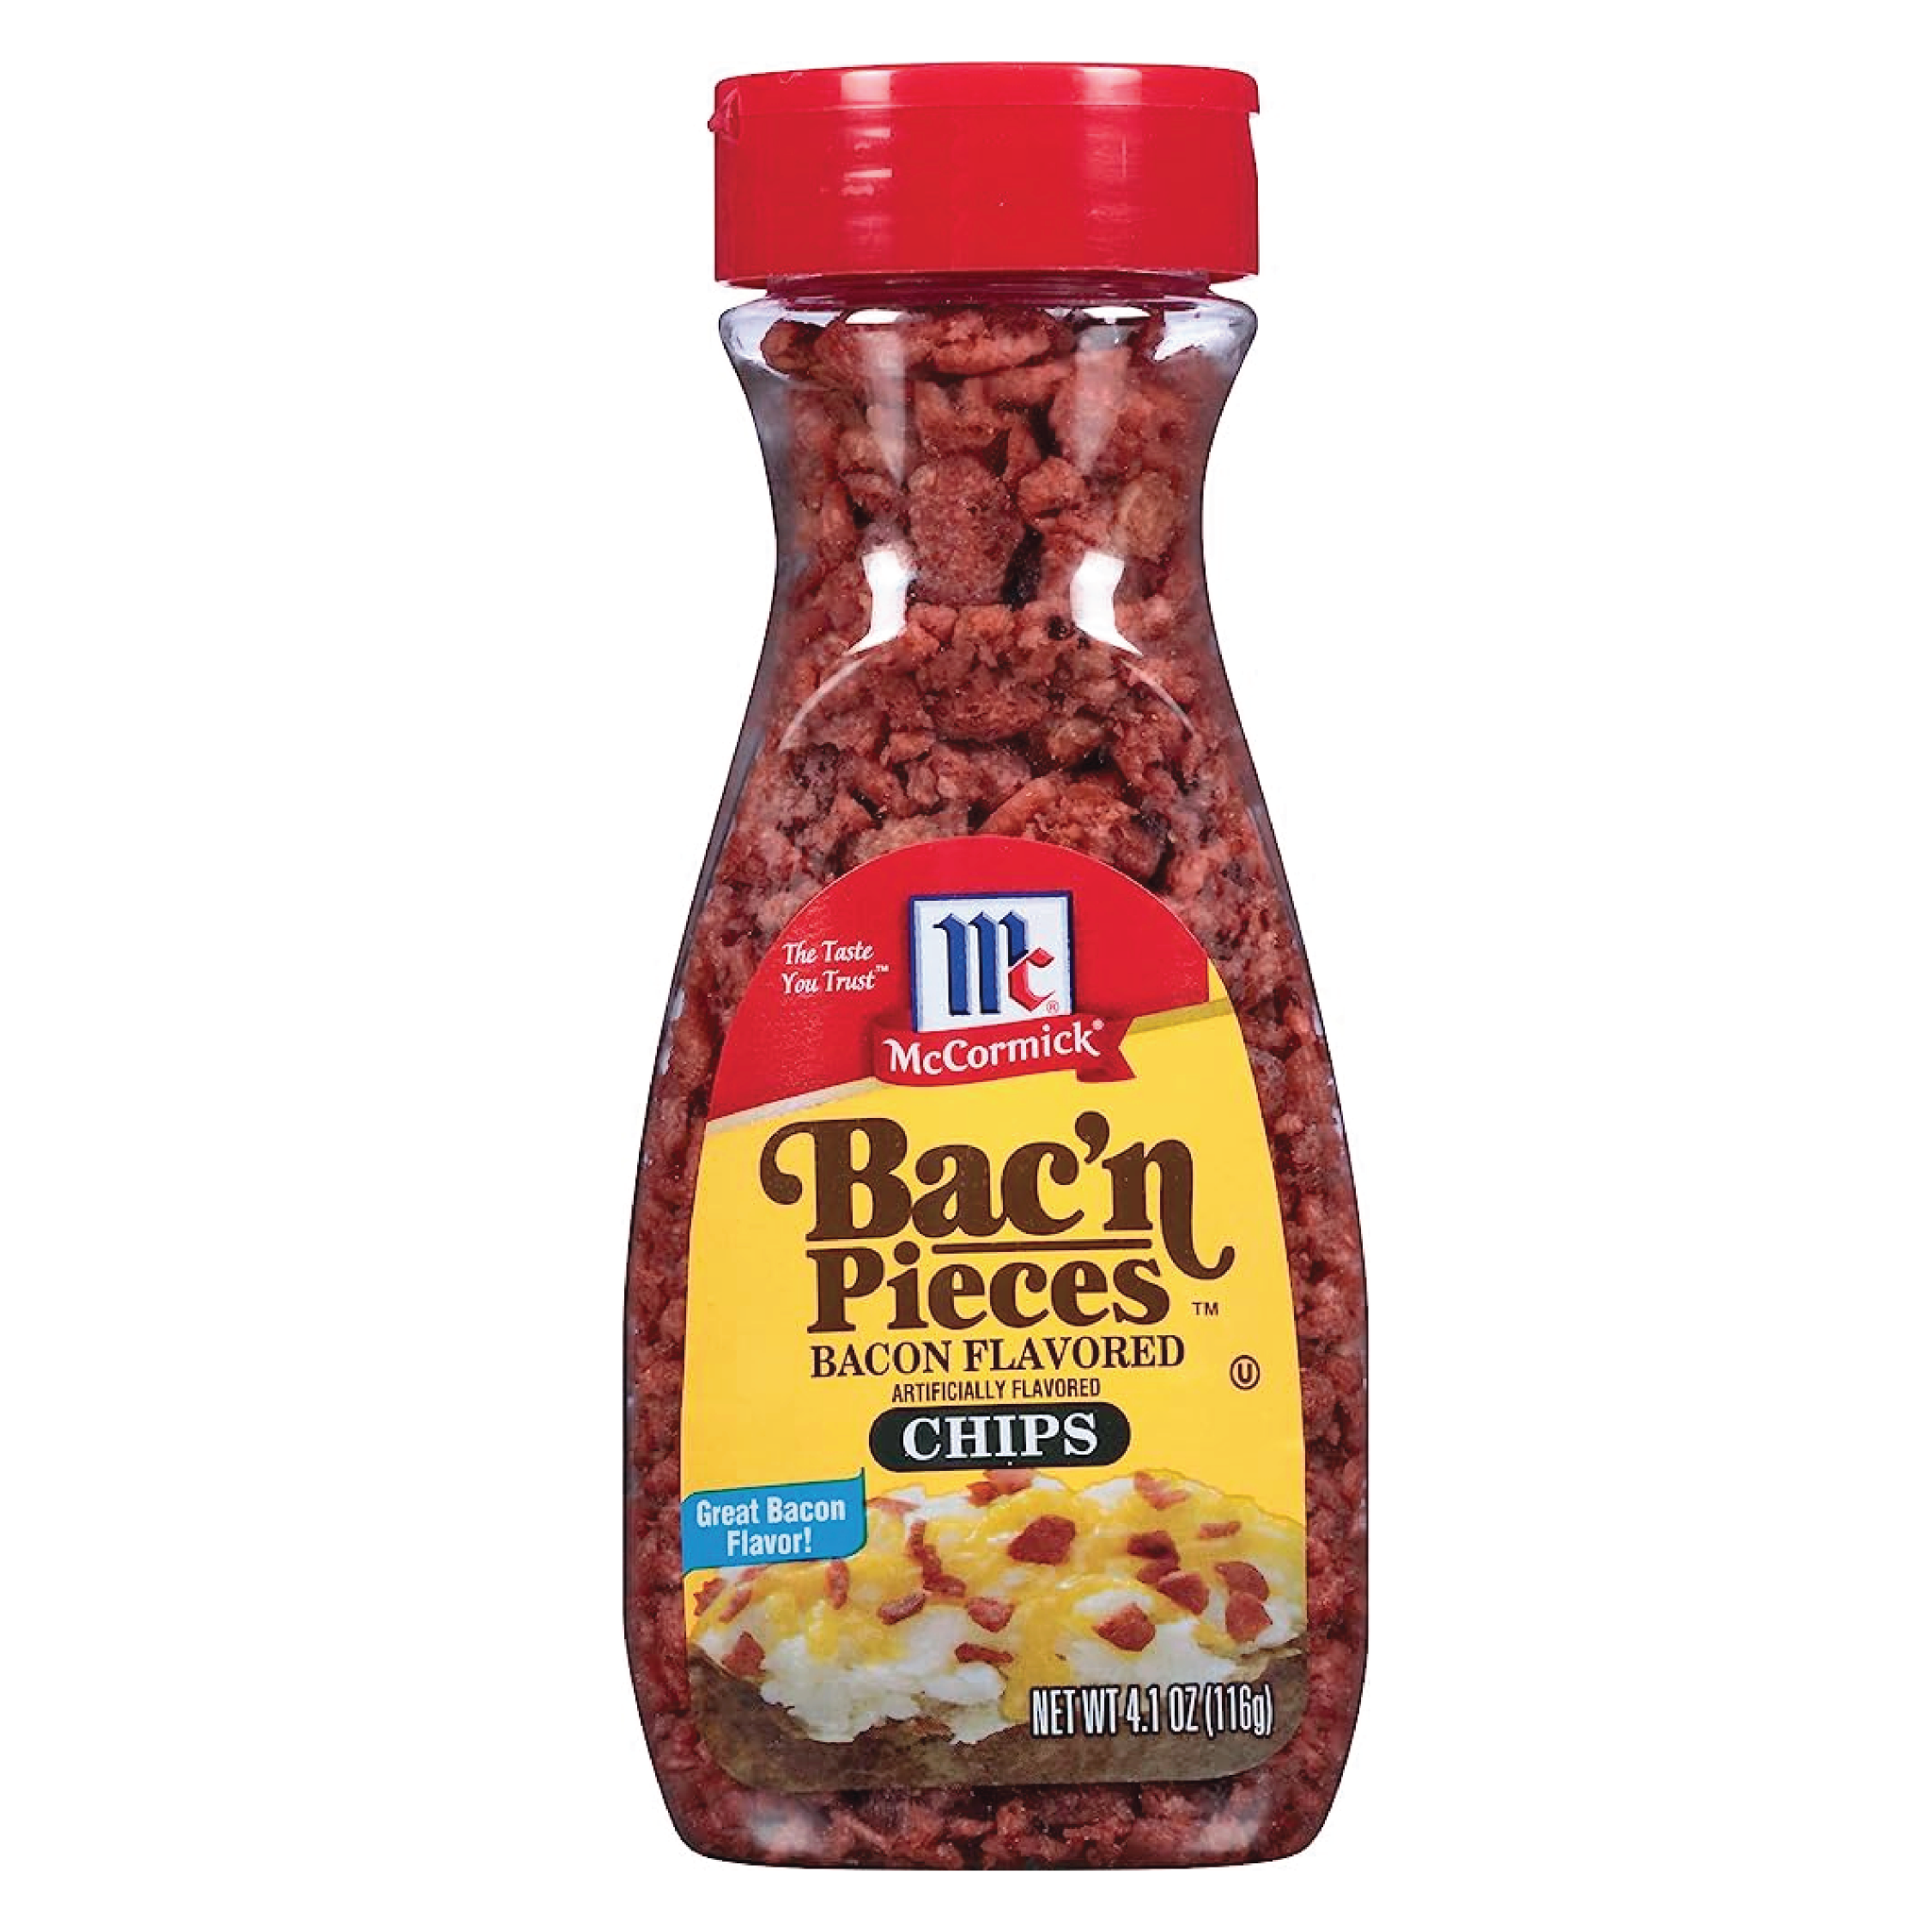 McCormick Bac'n Pieces Original Bacon Flavored Chips Topping 4.1oz